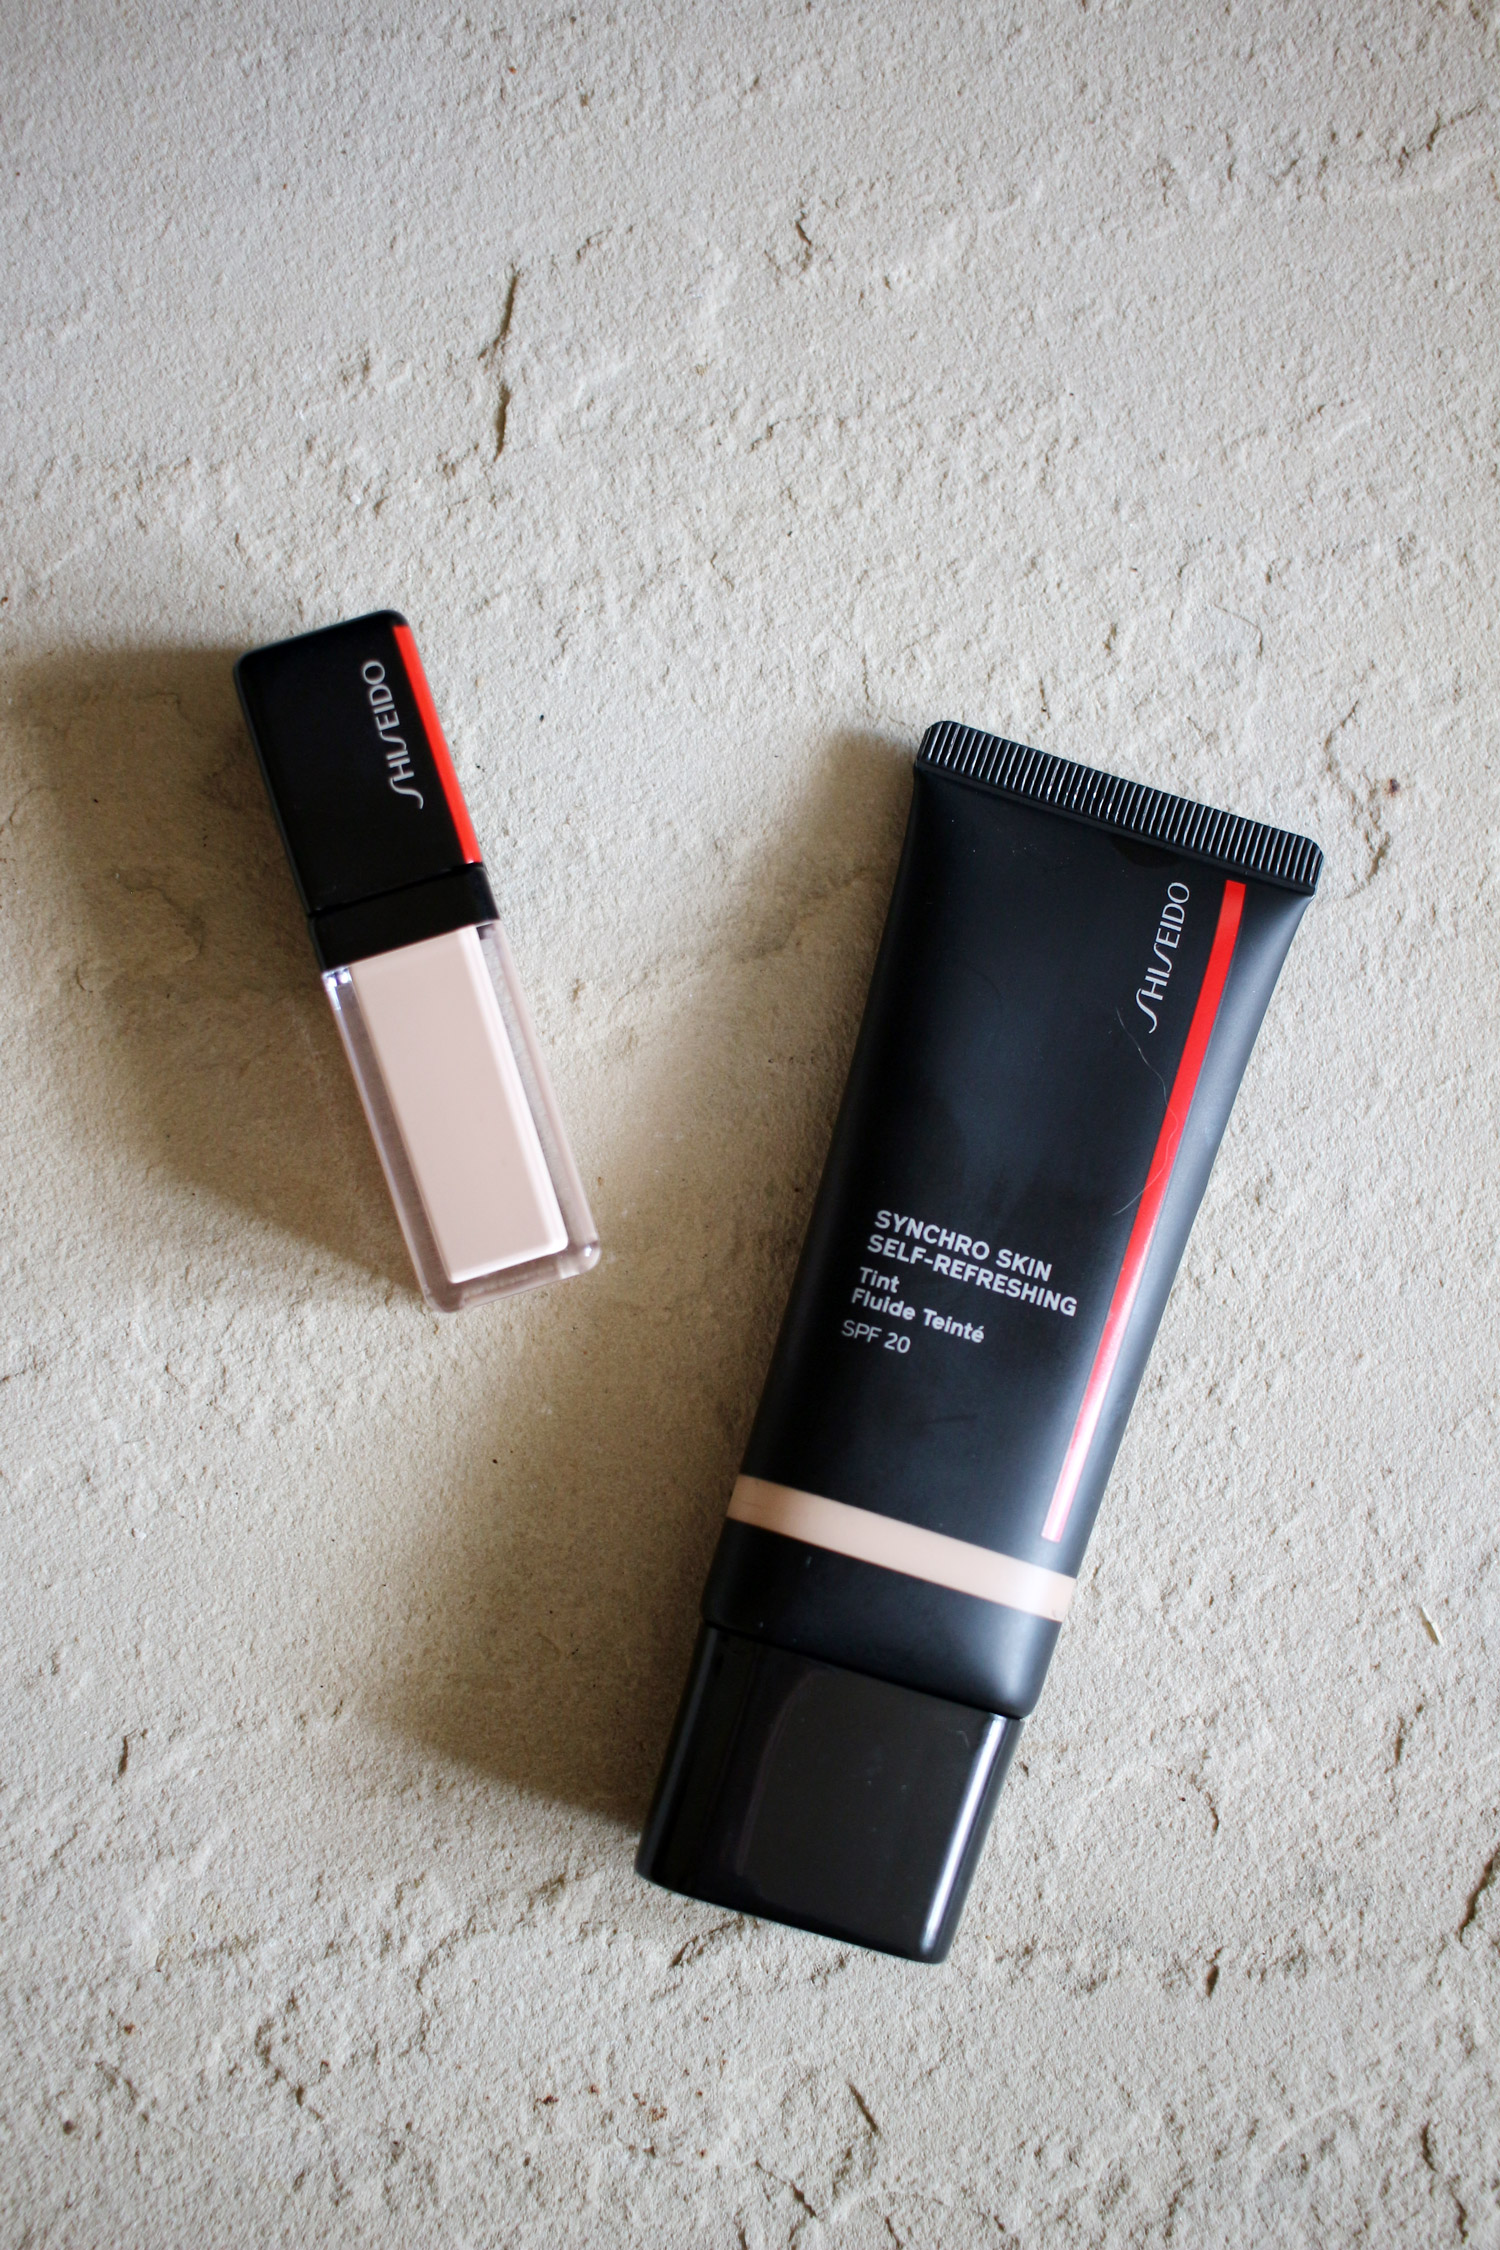 shiseido-synchro-skin-self-refreshing-tint-and-concealer-review-7